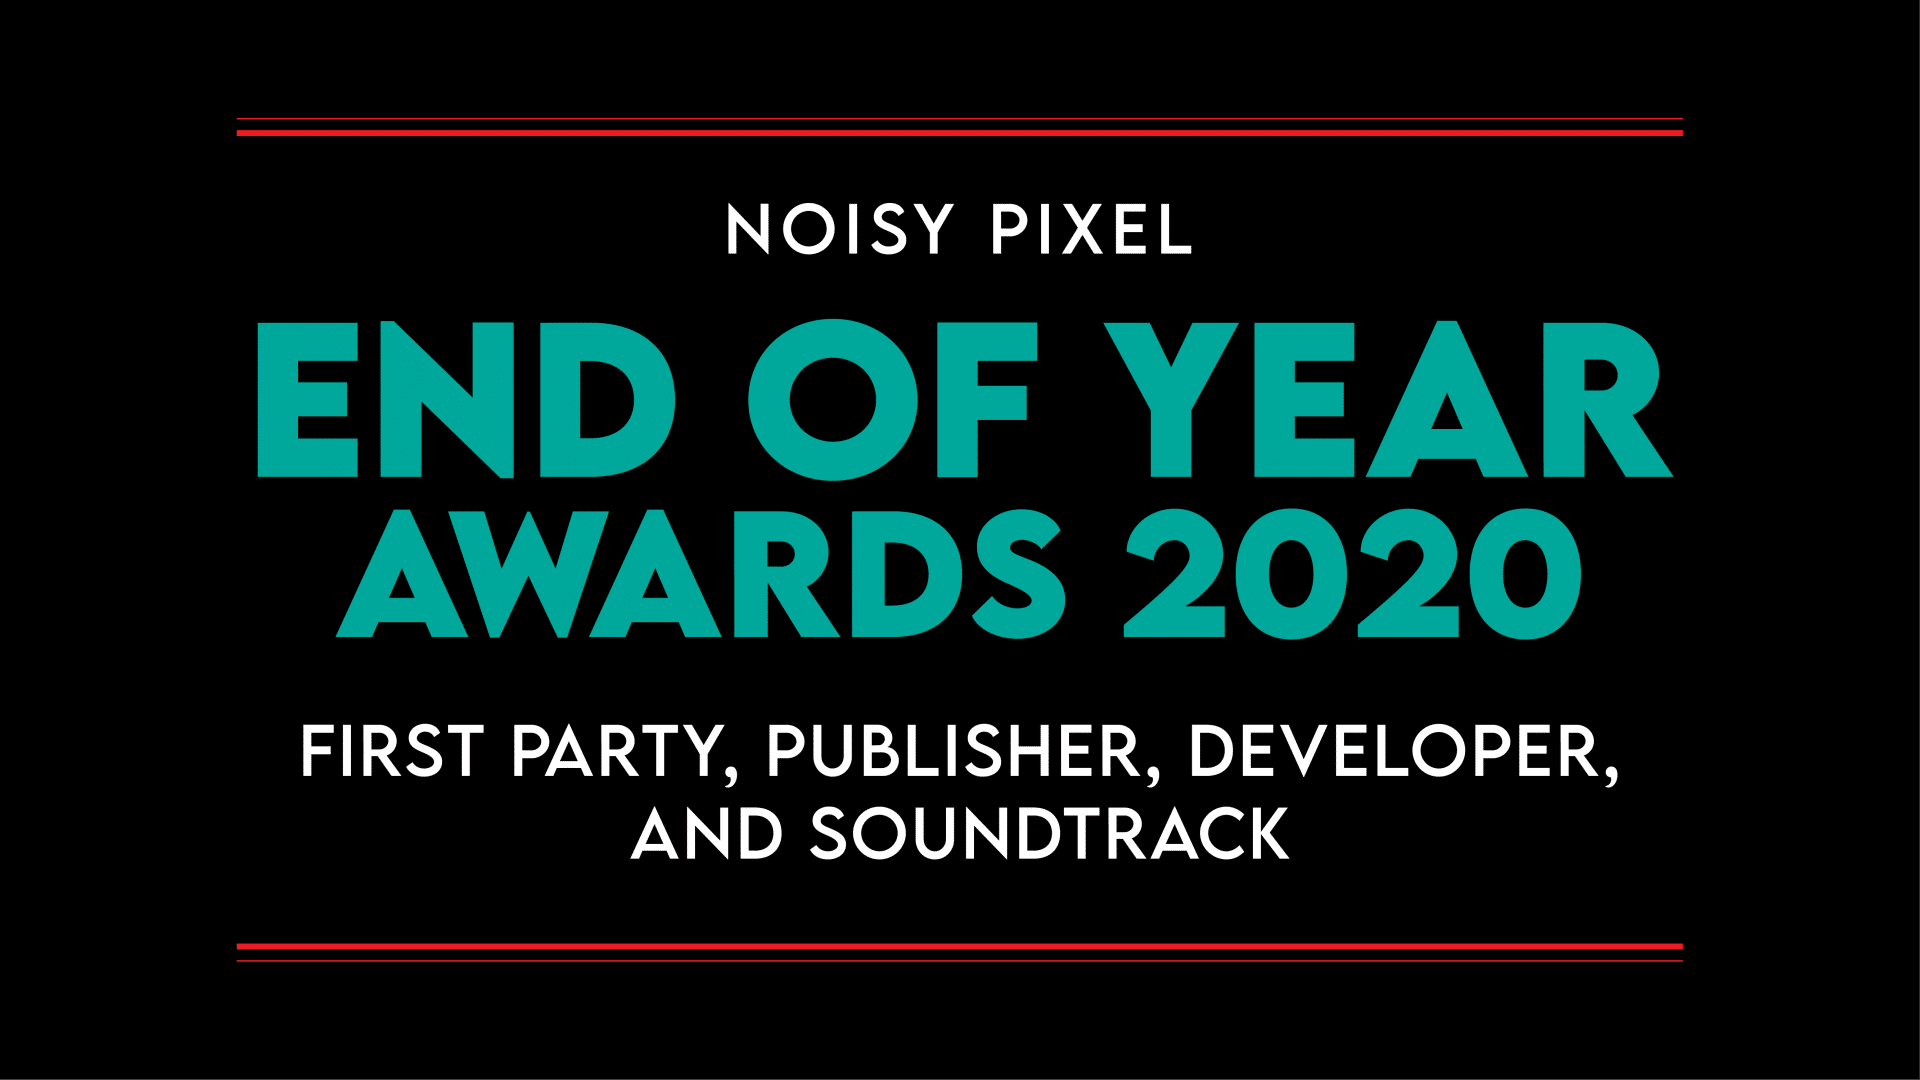 Noisy Pixel’s End of Year Awards 2020: First Party, Publisher, Developer, and Soundtrack